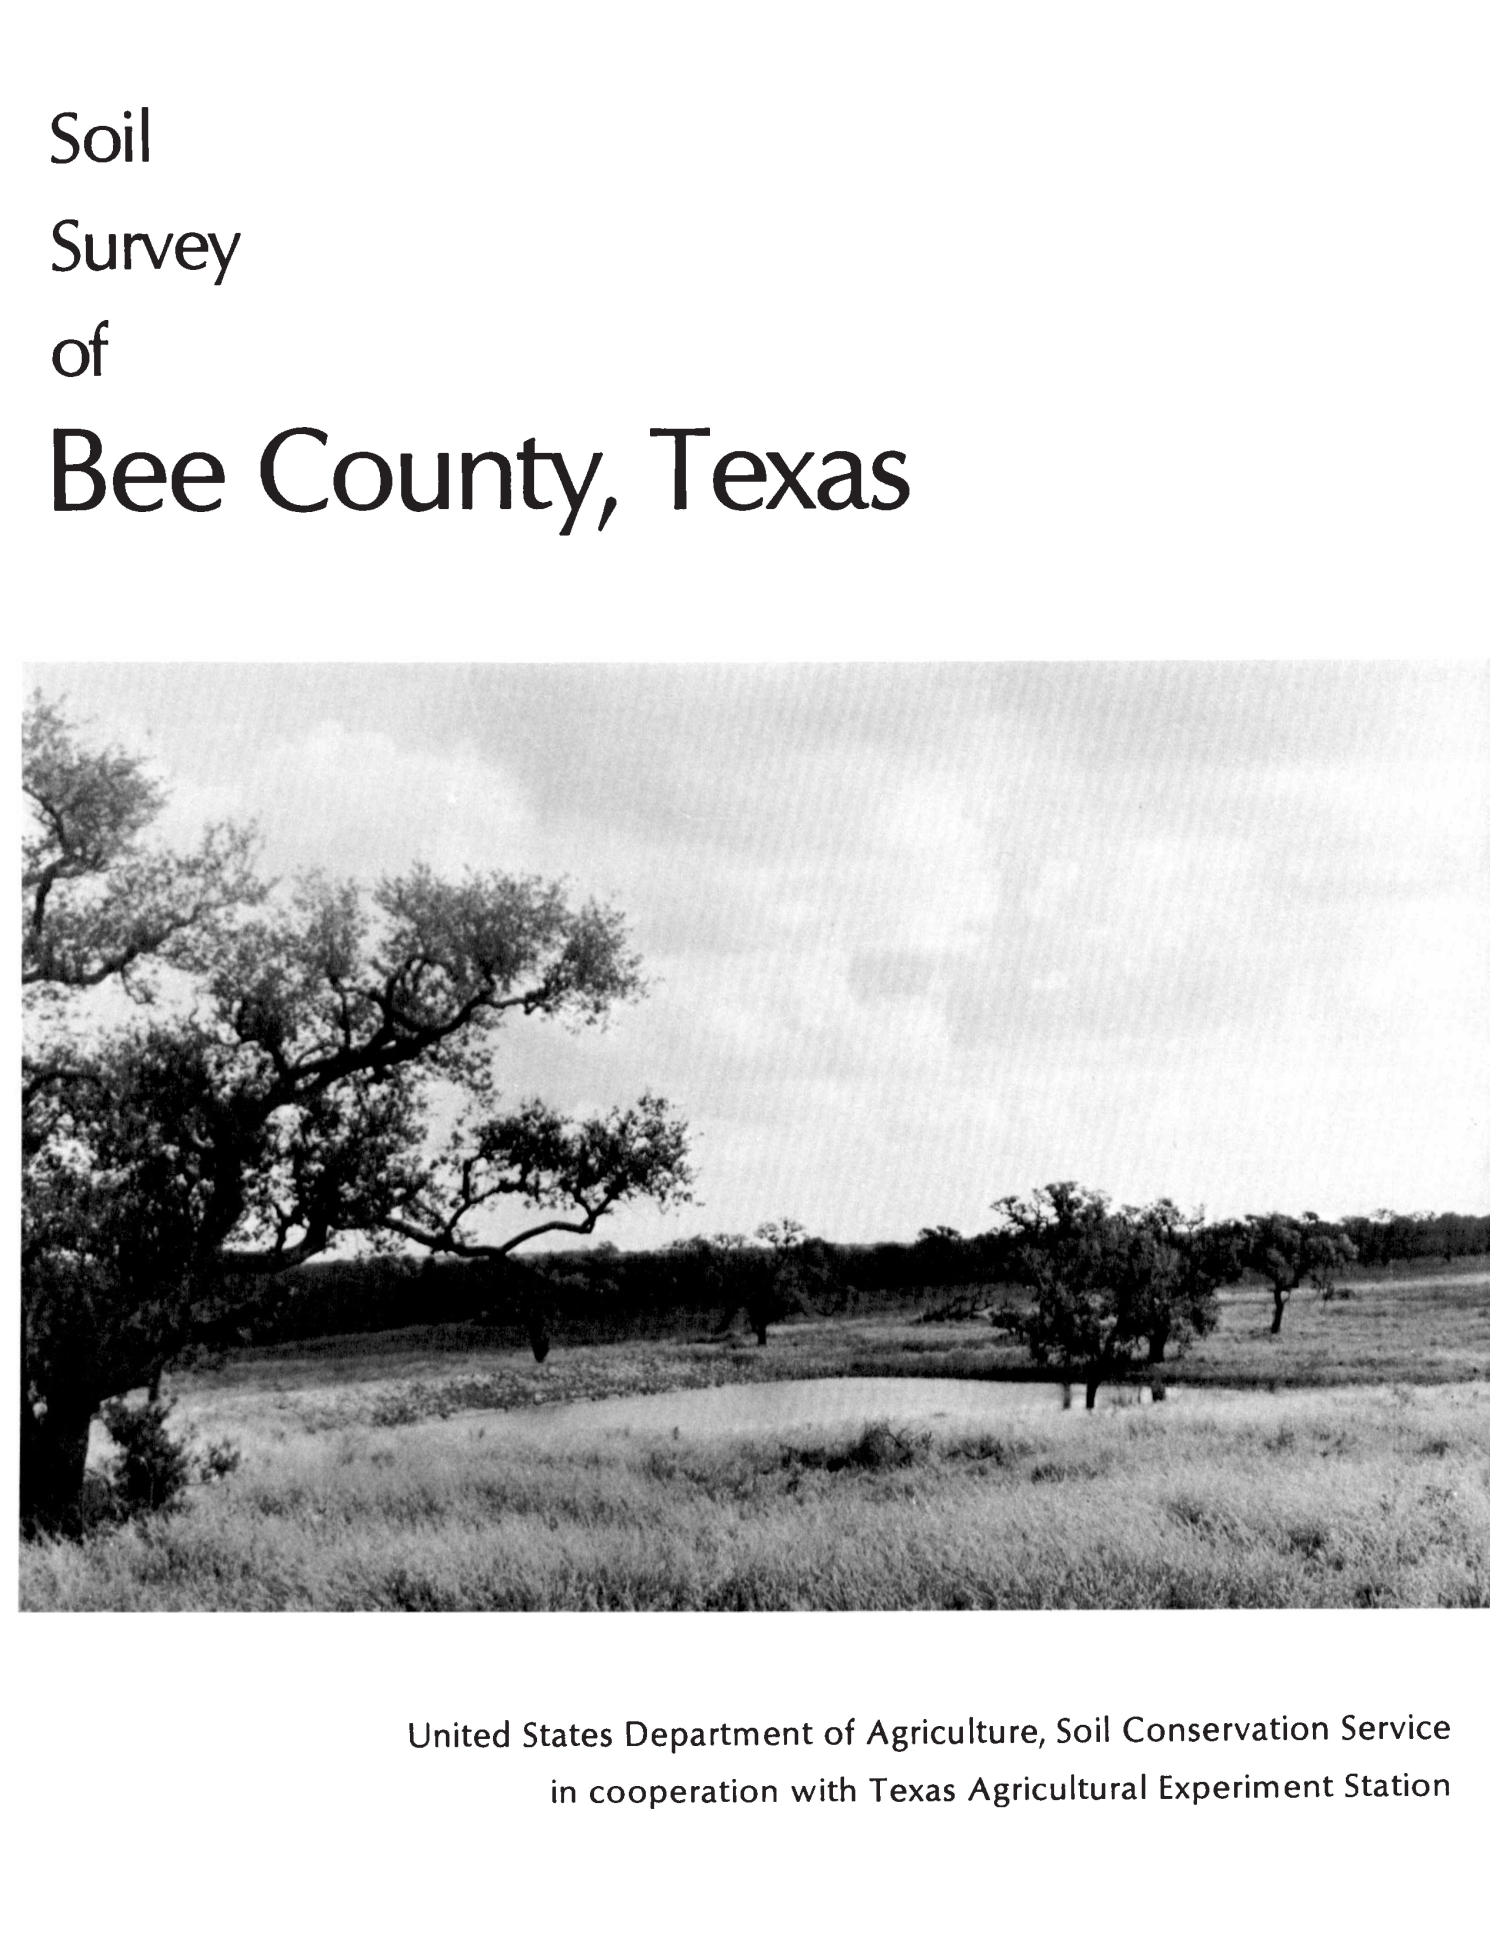 Soil Survey of Bee County, Texas
                                                
                                                    Front Cover
                                                